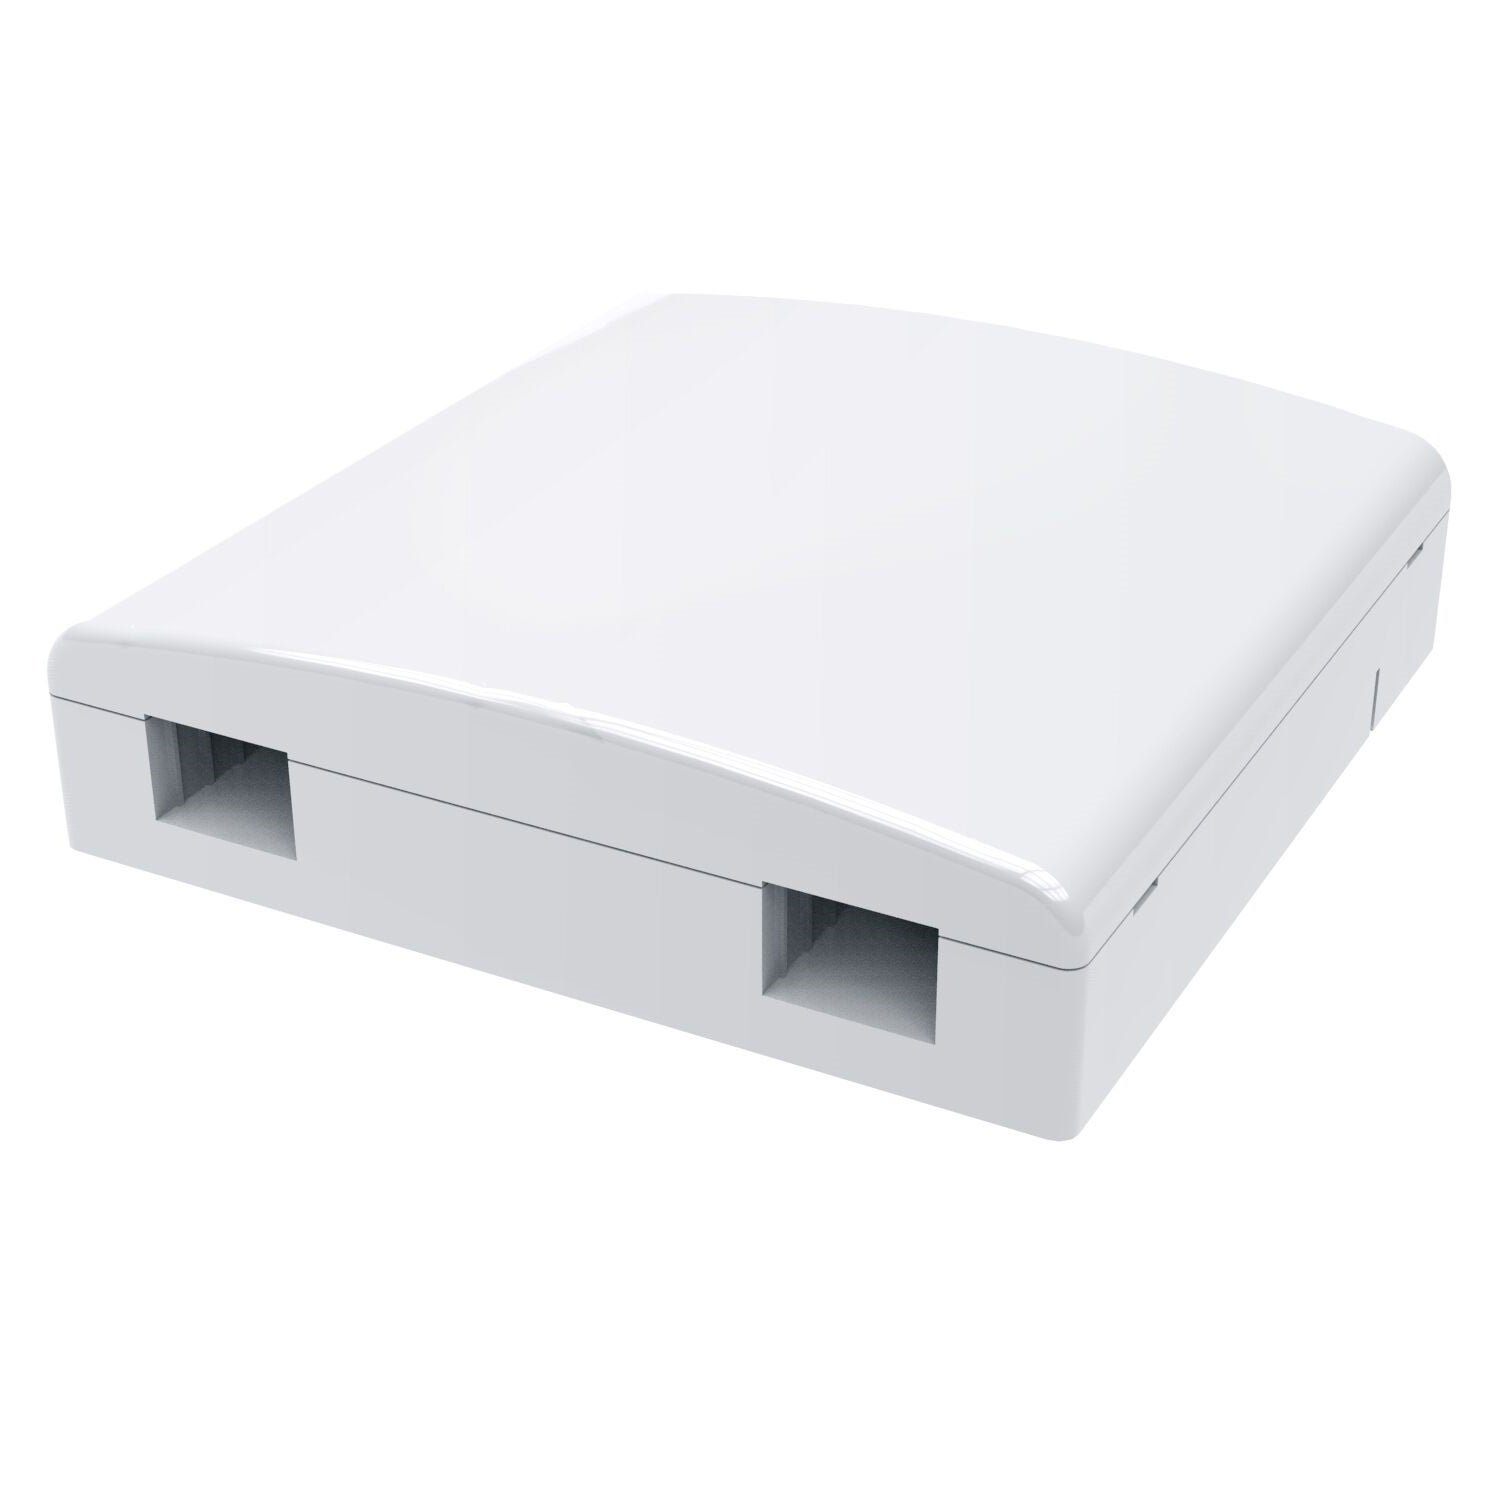 Ultima Fibre Wall Outlet (Compact) Image